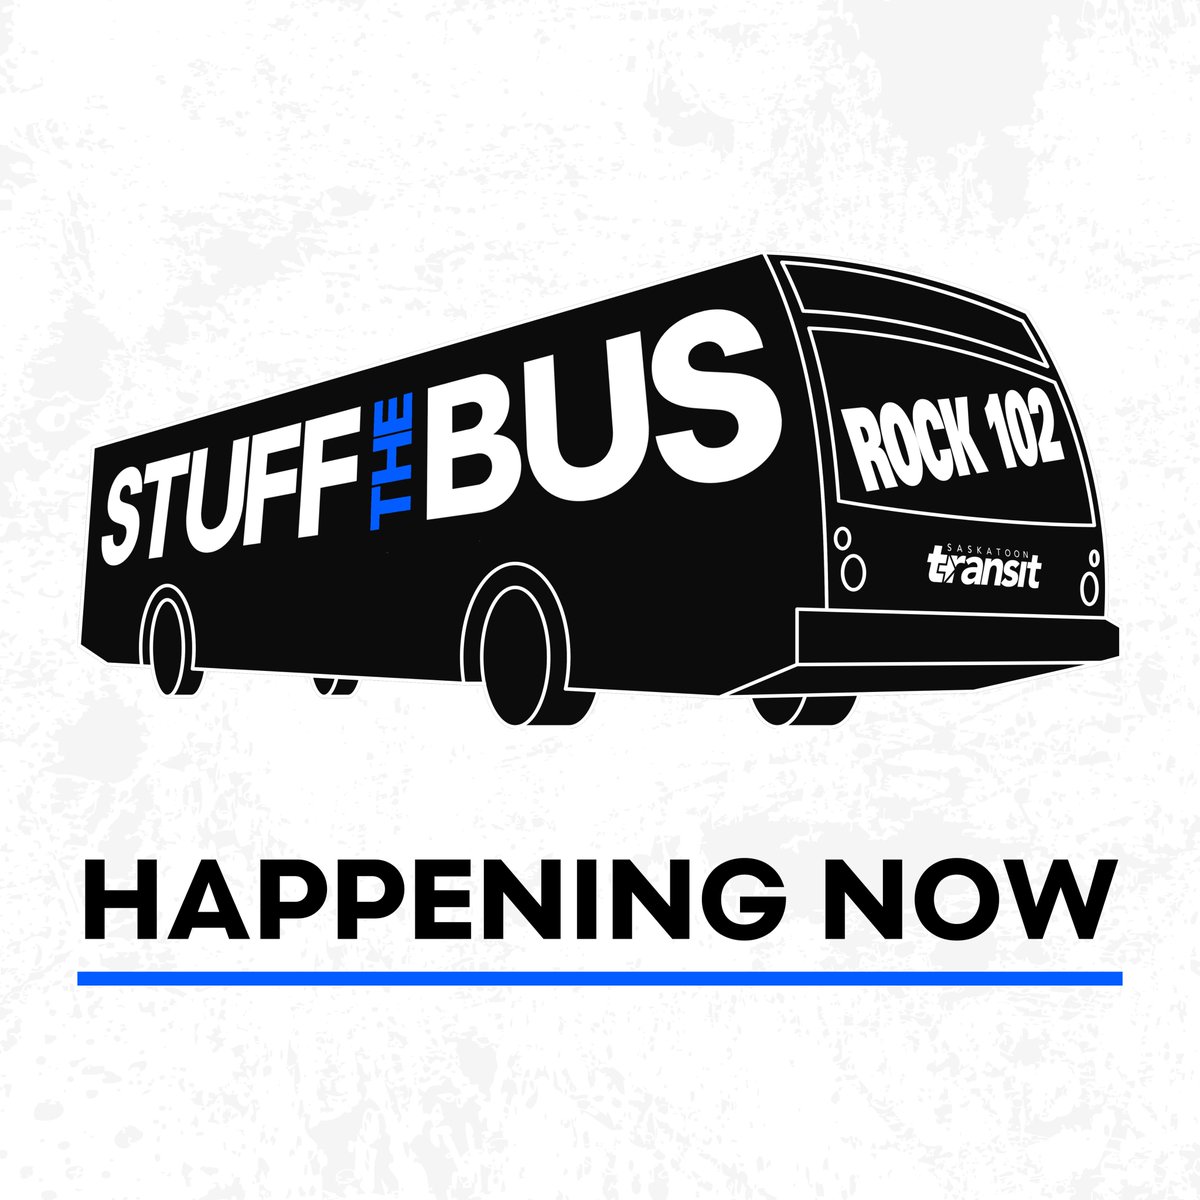 JOIN US FOR STUFF THE BUS 2024 - TODAY!!!!! This family-fun event is happening from 6am to 6pm at the Saskatoon Co-op Food Store on 8th at The Centre Mall. LEARN MORE: saskatoonfoodbank.org/stuff-the-bus